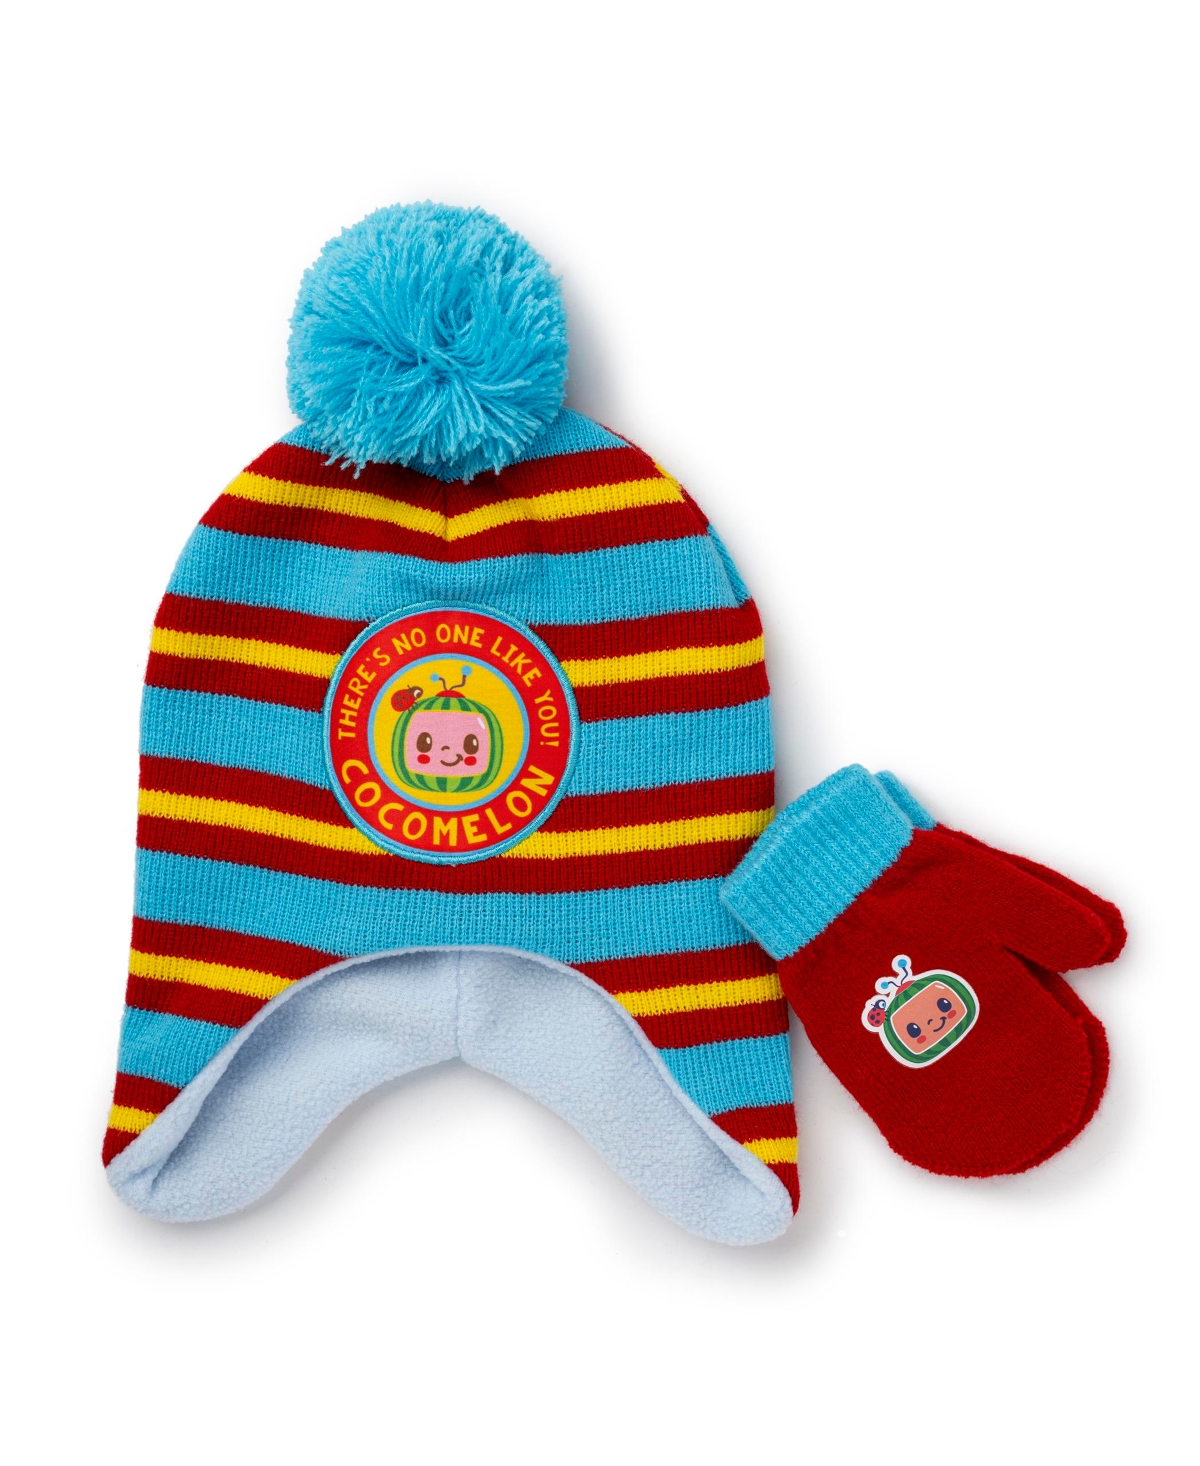 Berkshire Babies' Cocomelon Toddler Hat And Mitten Set, 2 Piece In Blue